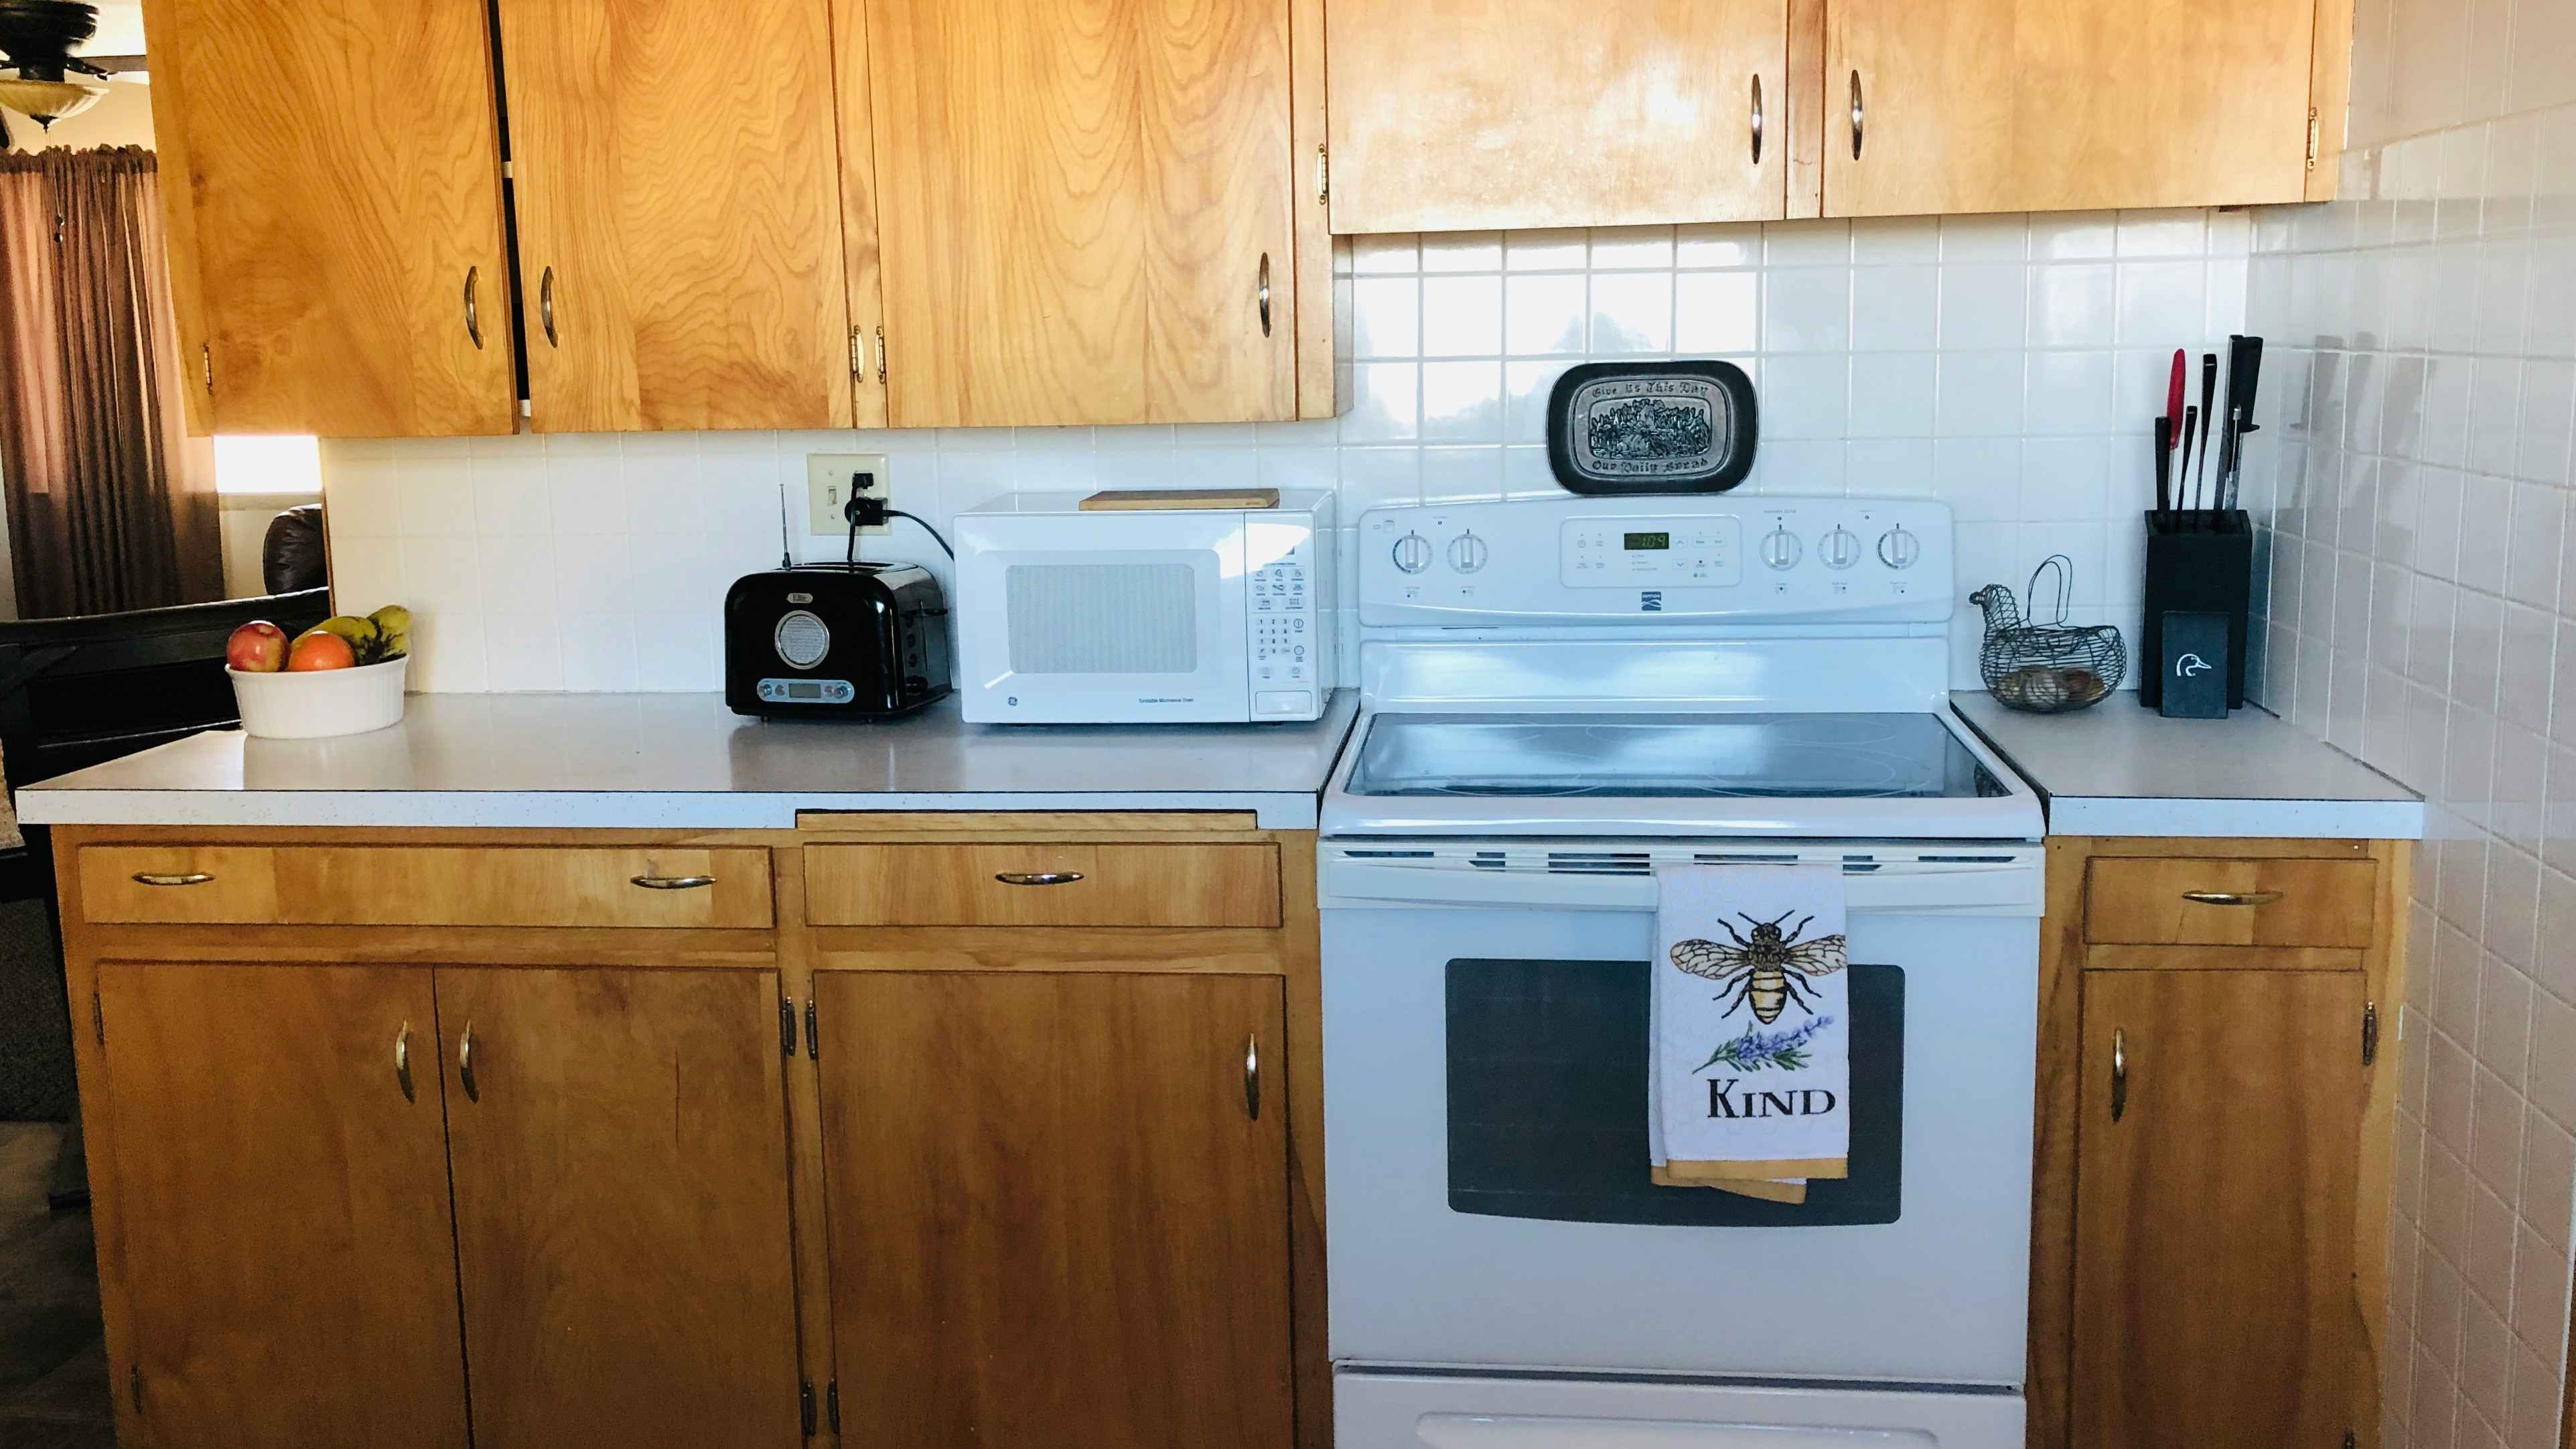 Airbnb Savings: Rent a place with a kitchen to save money on food costs.